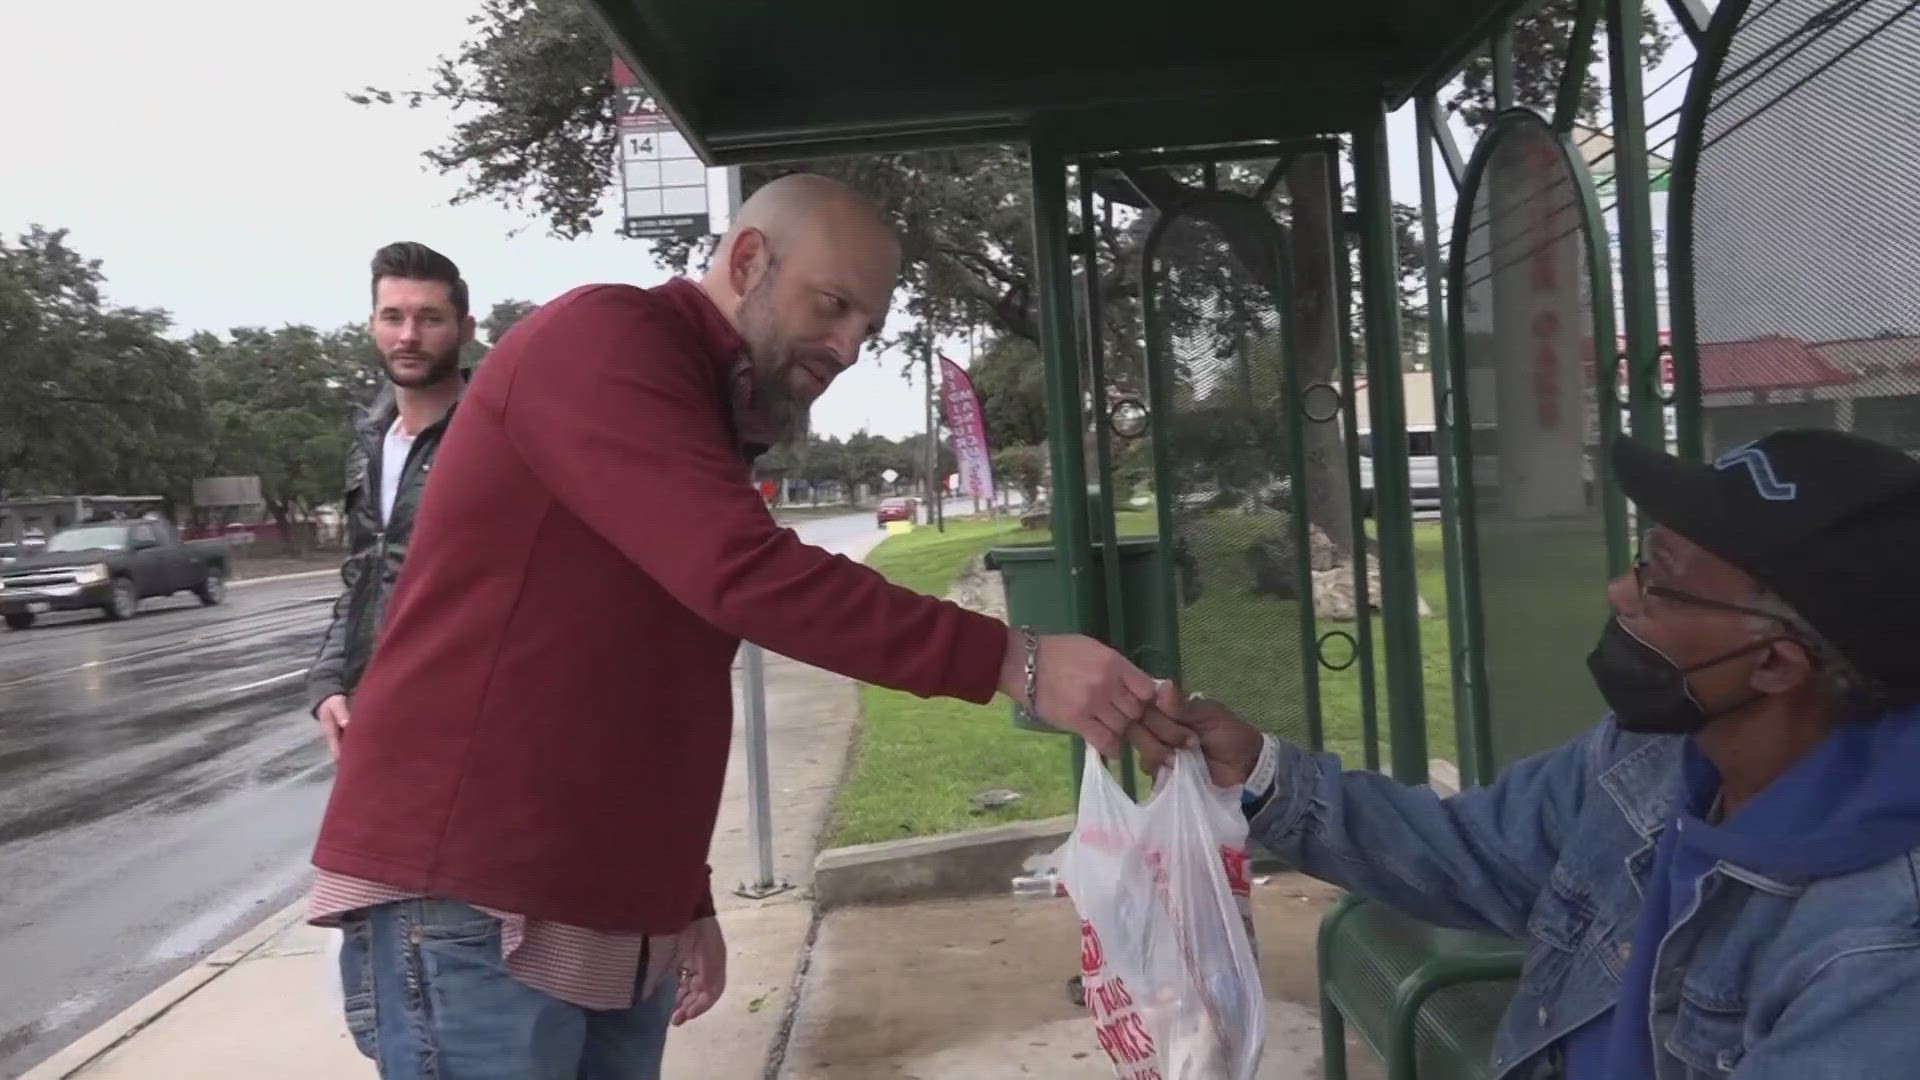 Jason Opalinski, family and friends spent several hours traveling across San Antonio's north side offering turkey sandwiches, socks, and bandages to the community.